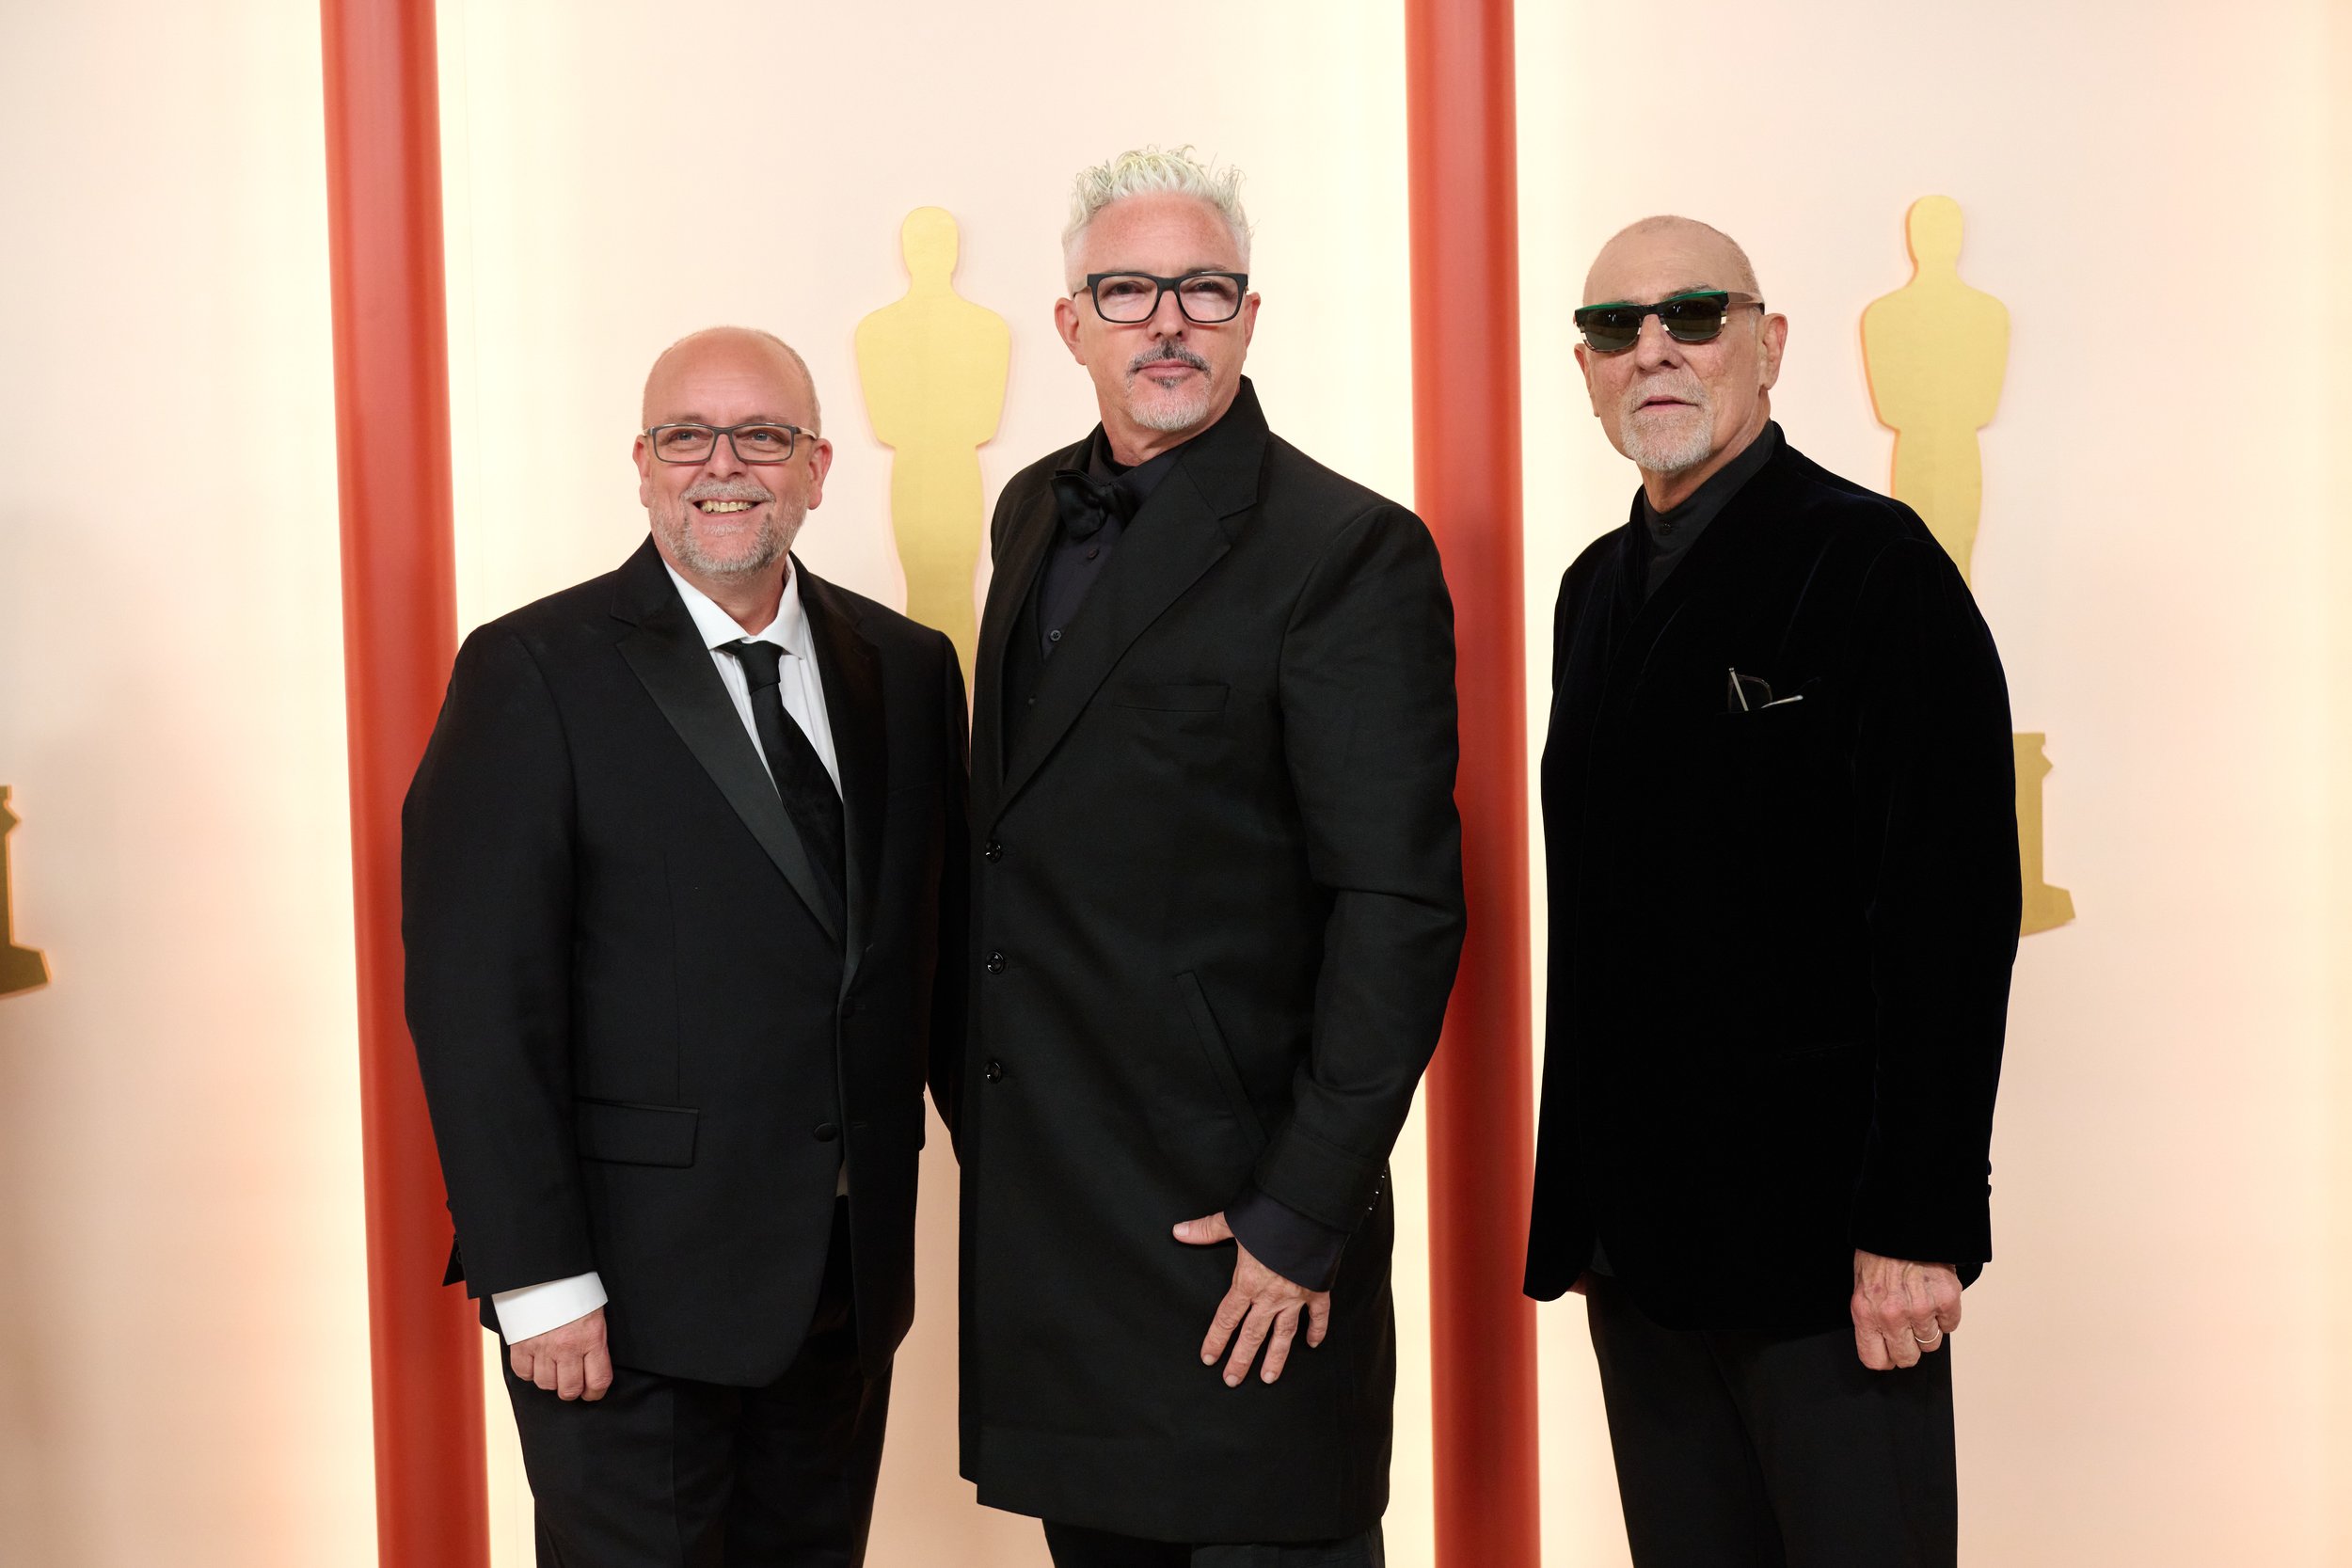 Oscar® nominees Mark Coulier, Jason Baird and Aldo Signoretti (L-R) arrive on the red carpet of the 95th Oscars